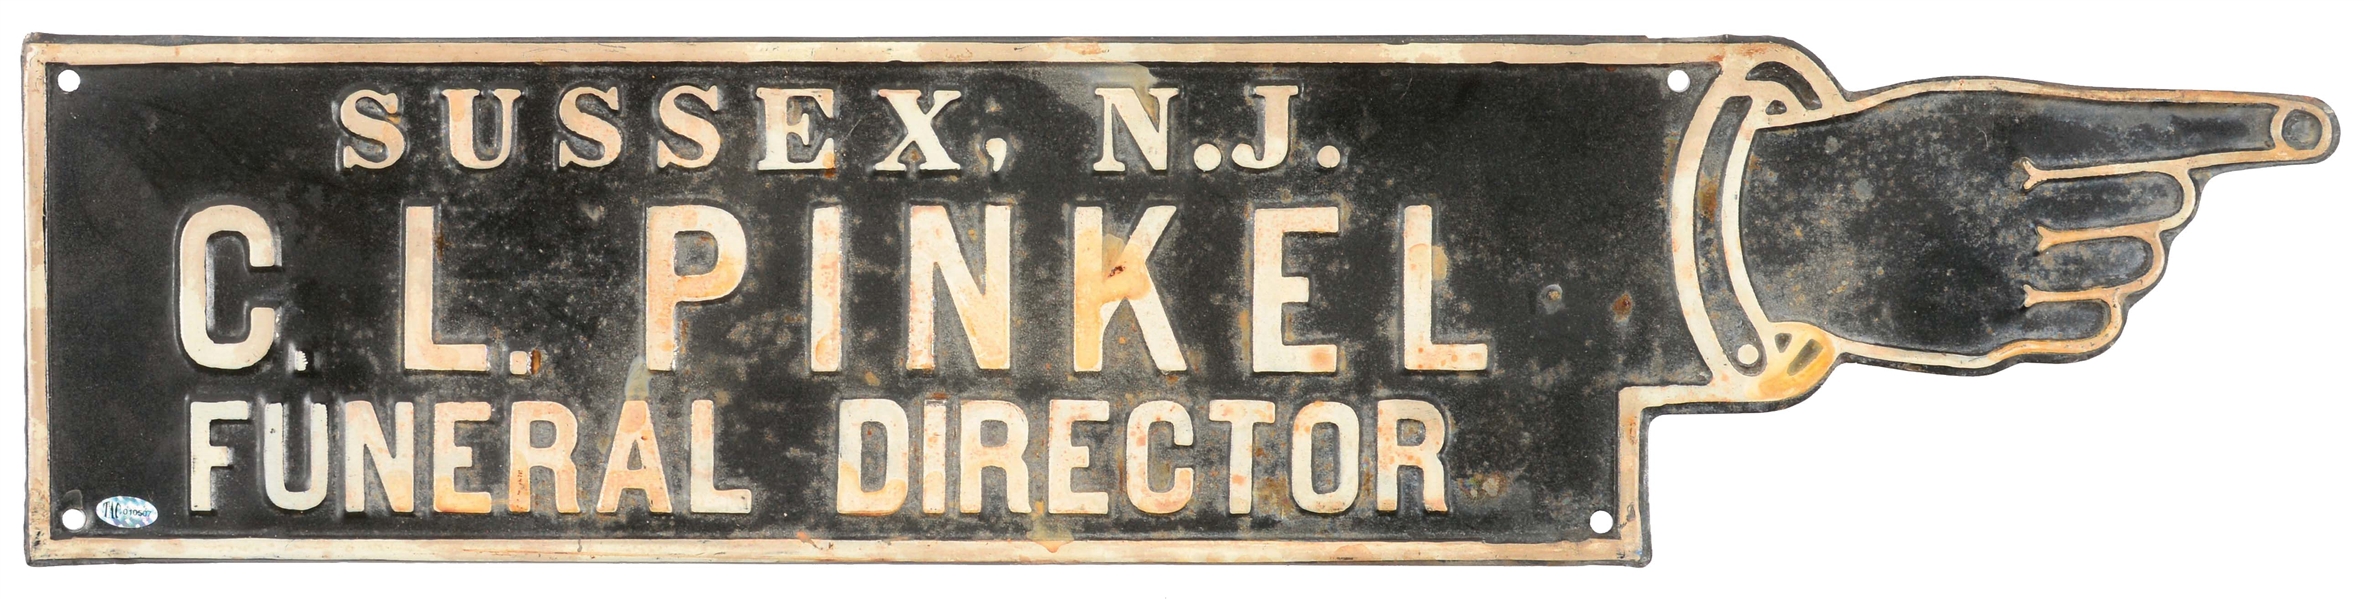 C.L. PINKEL FUNERAL DIRECTOR SUSSEX, NEW JERSEY EMBOSSED TIN FINGER POINTER SIGN. 